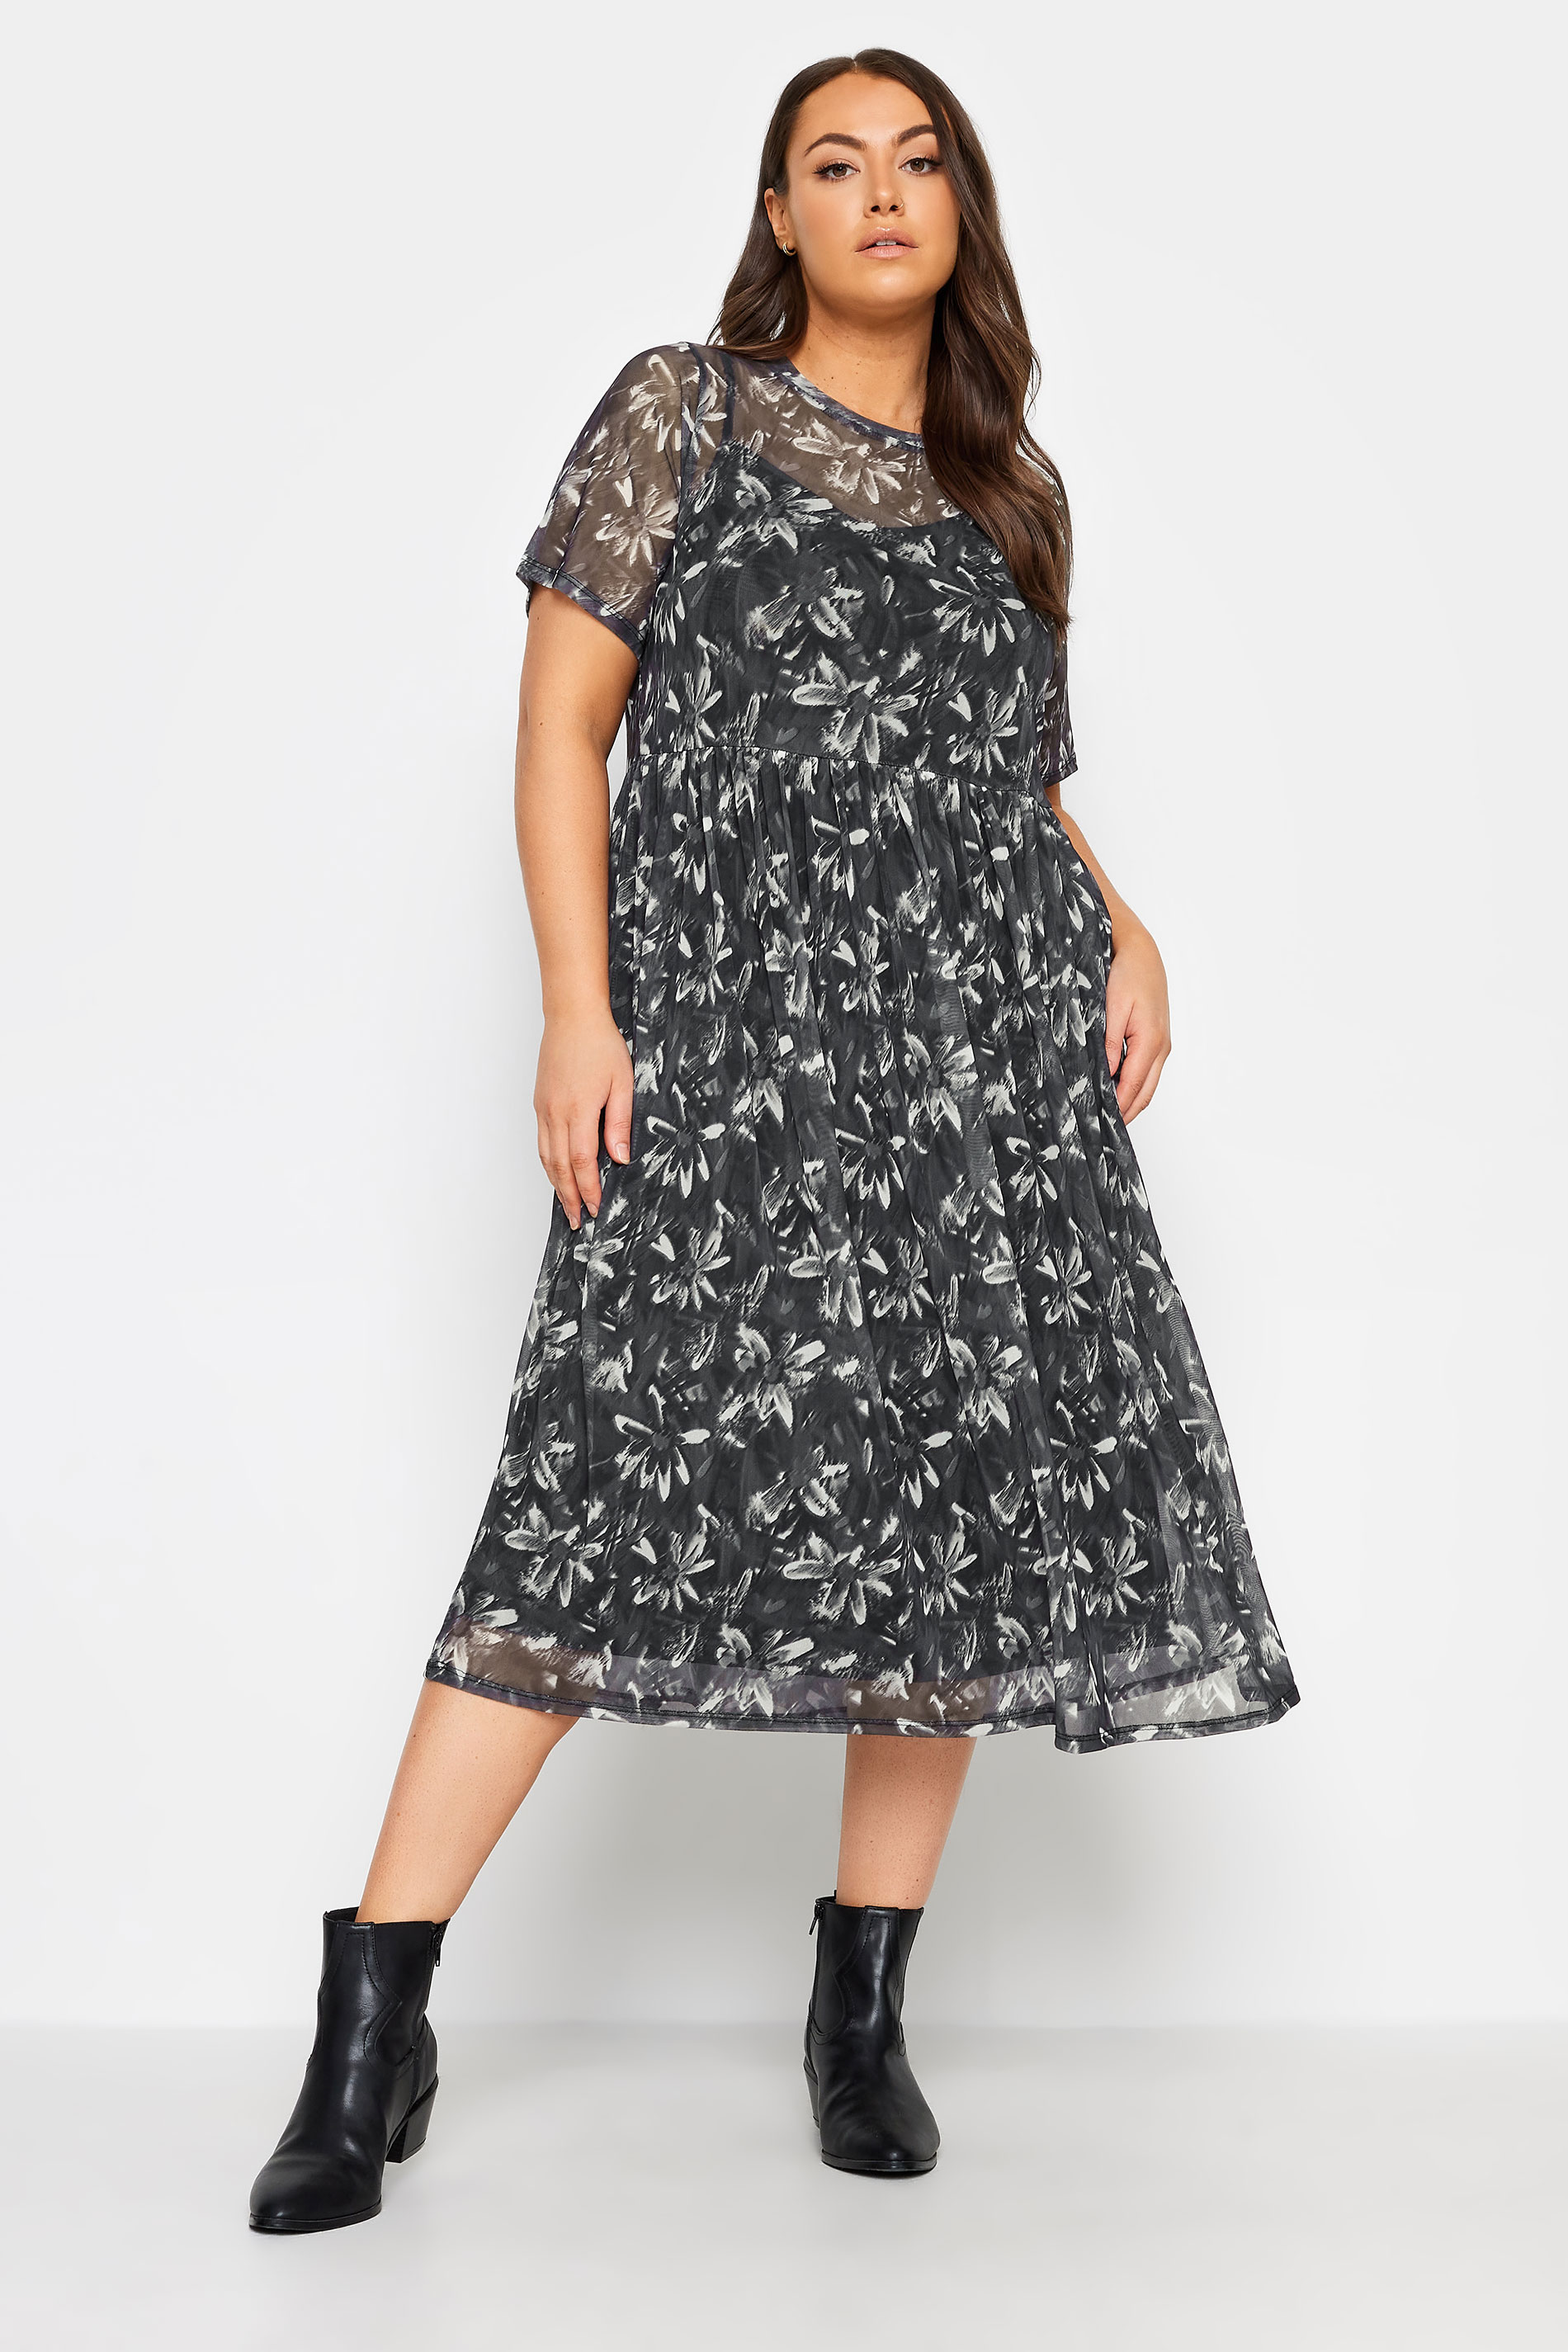 YOURS Plus Size Black & White Floral Print Mesh Smock Dress | Yours Clothing 1